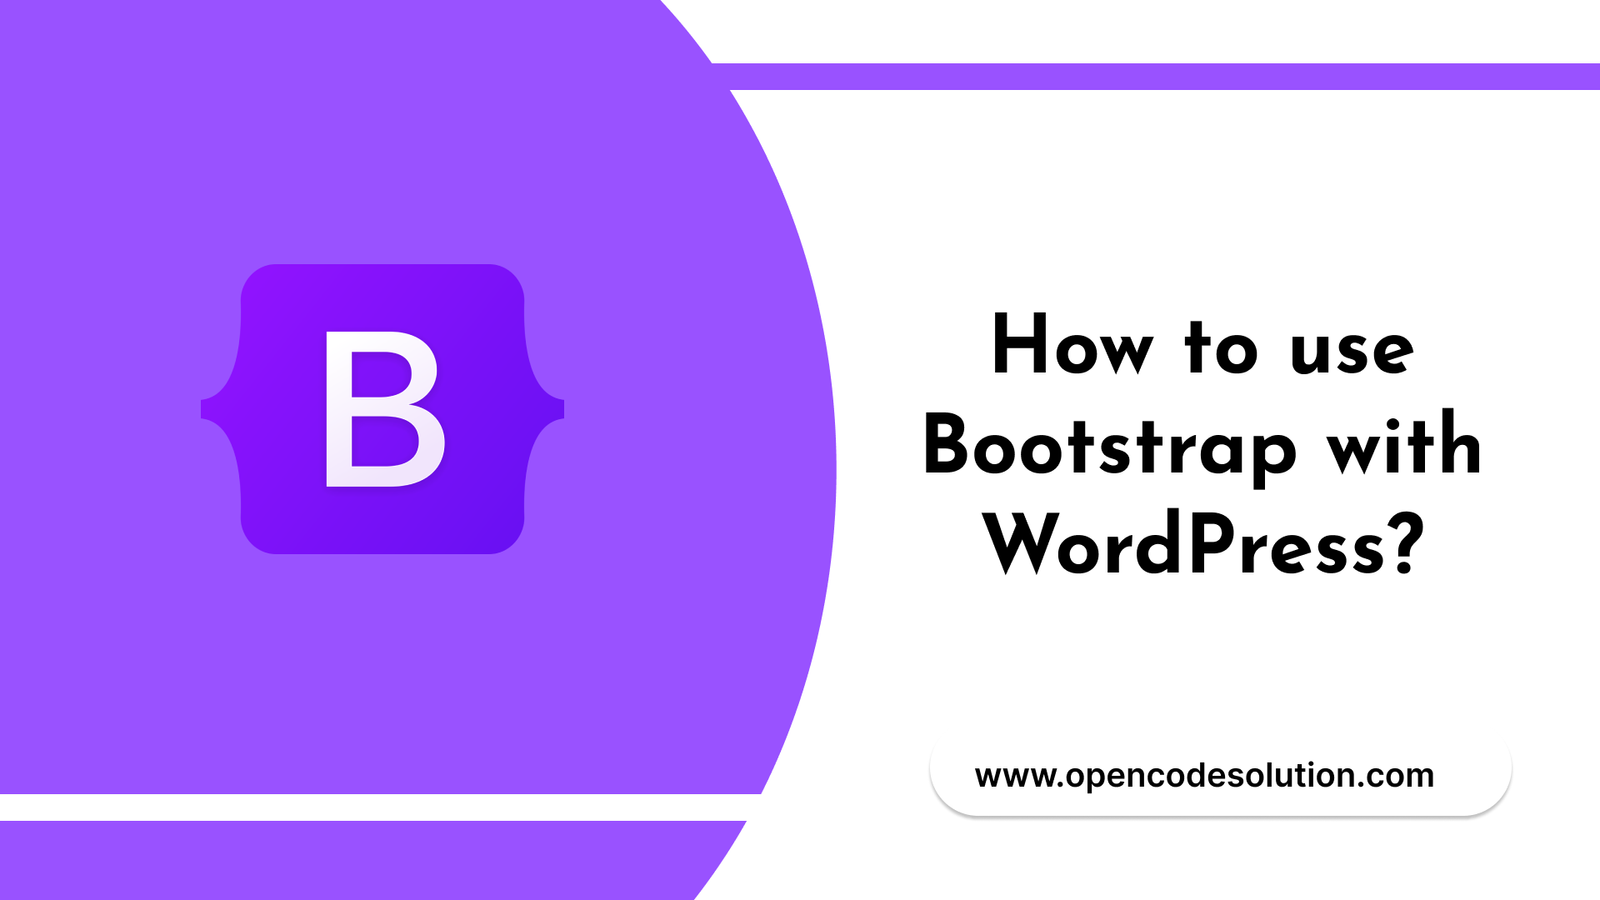 How to use Bootstrap with WordPress?